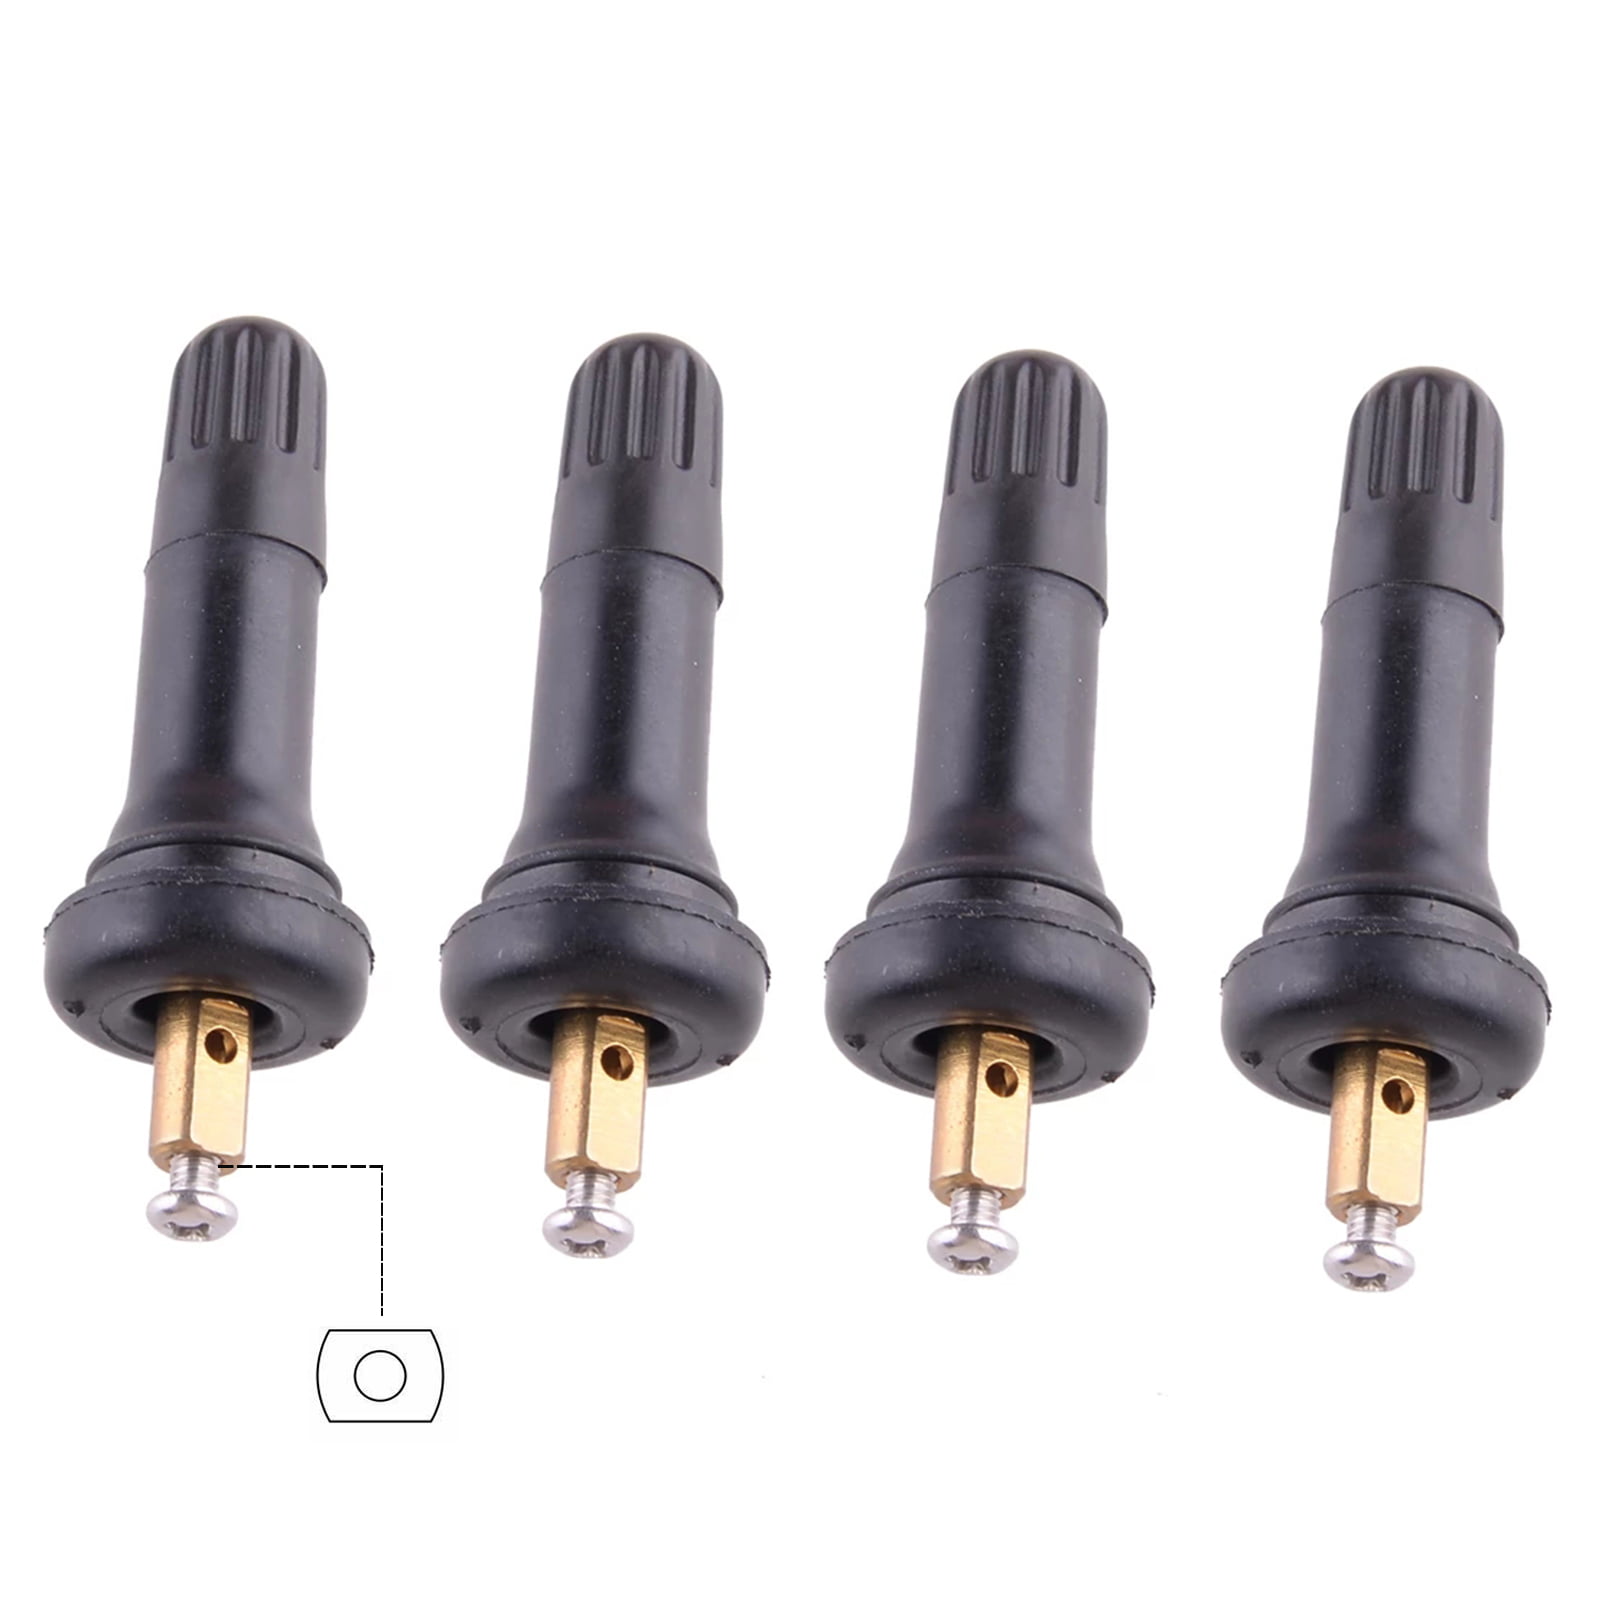 TPMS Rubber Valve Stems Replacement Bulk 50 ct. 